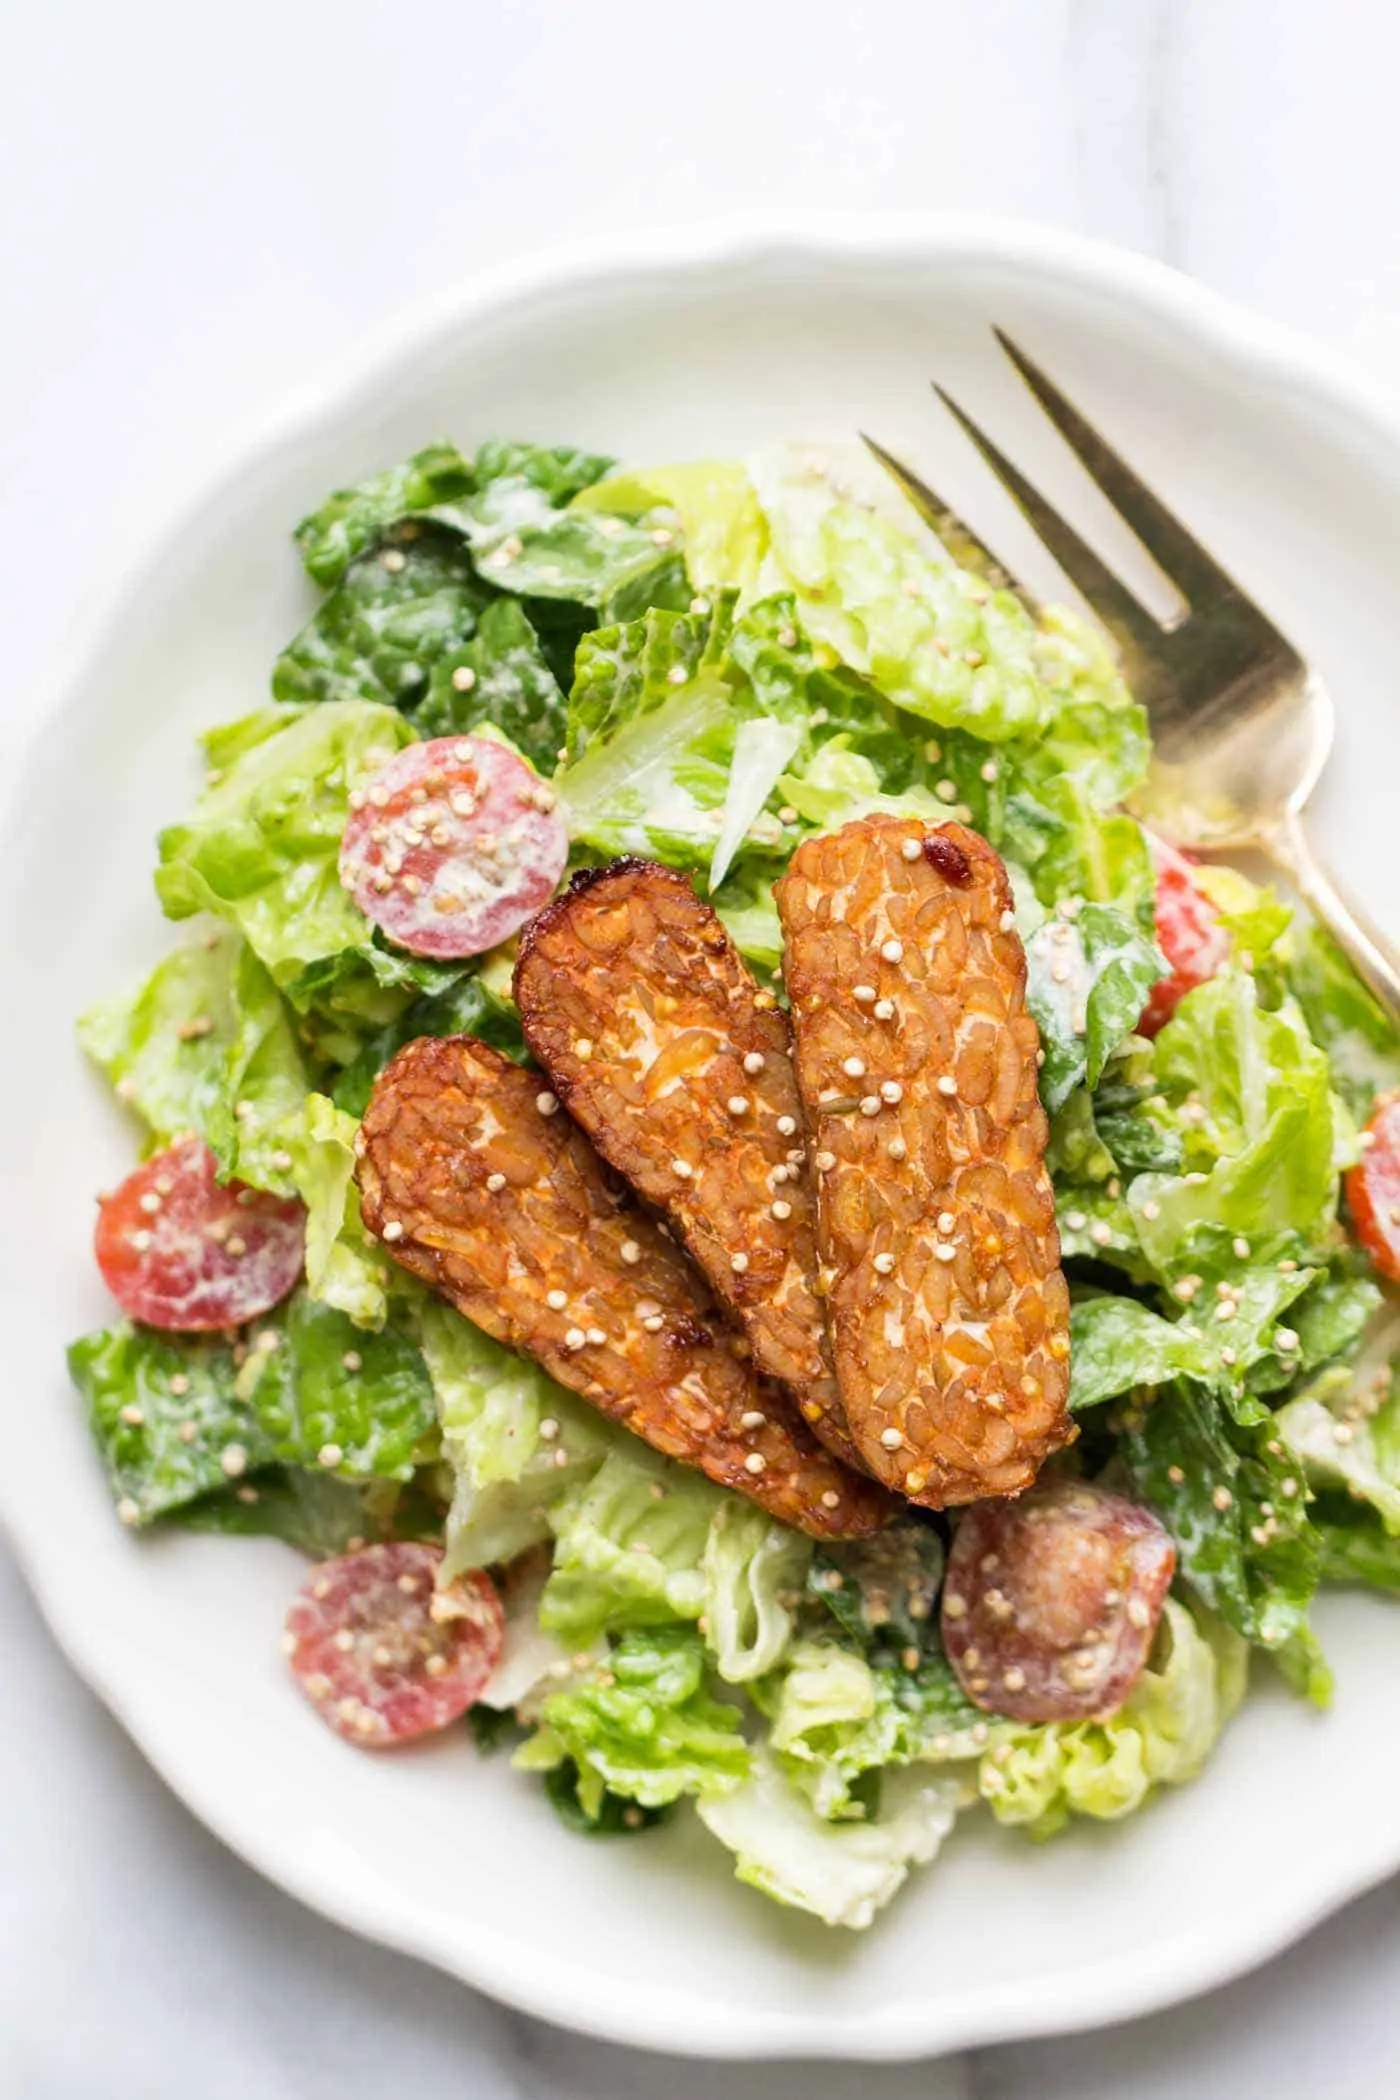 Vegan Caesar Salad made with a cashew-less dressing and baked tempeh strips - so easy and SO delicious!